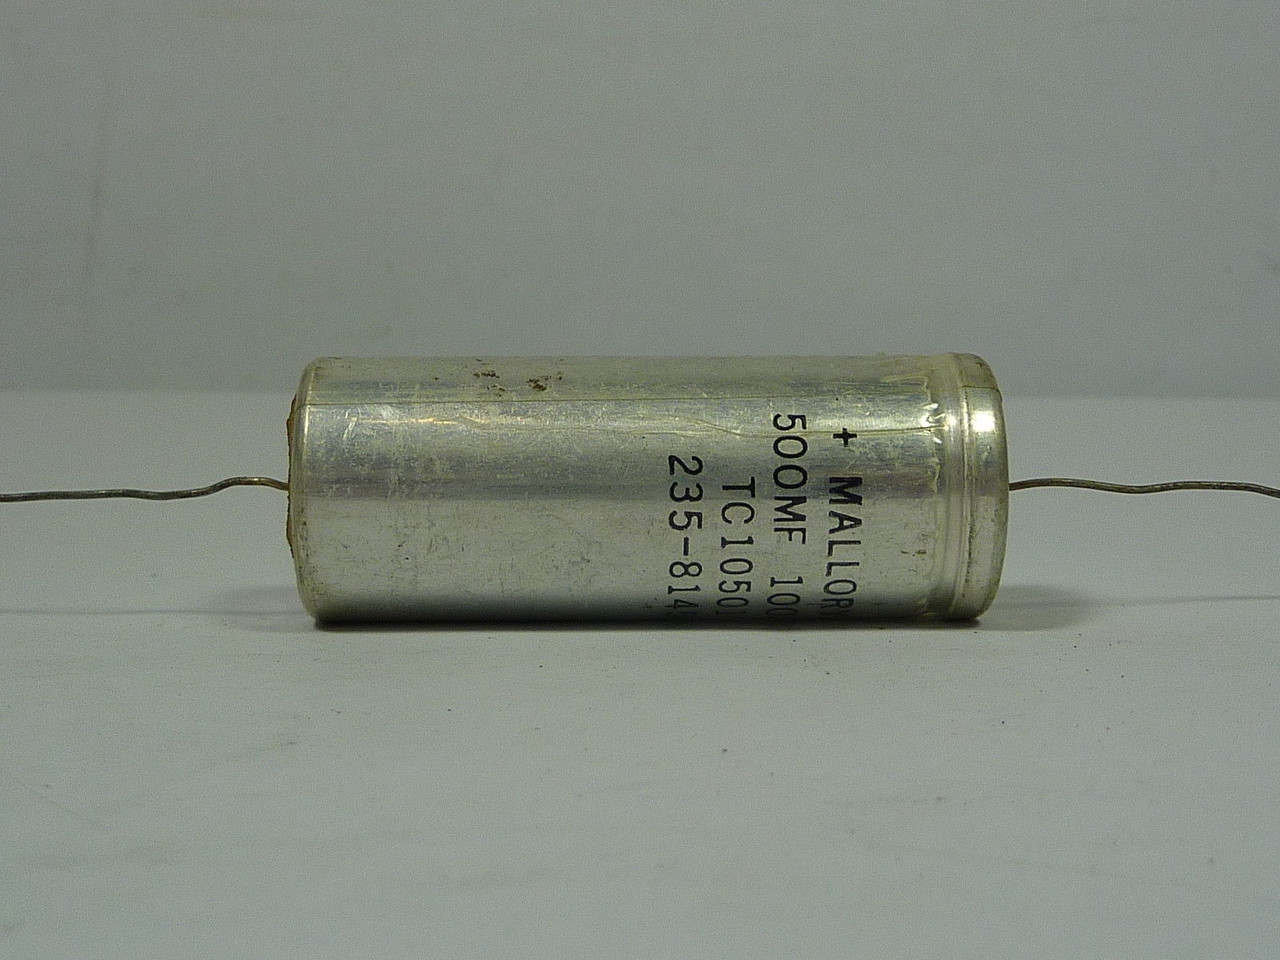 Mallory TC10501 Electrolytic Capacitor 500mfd 100VDC USED